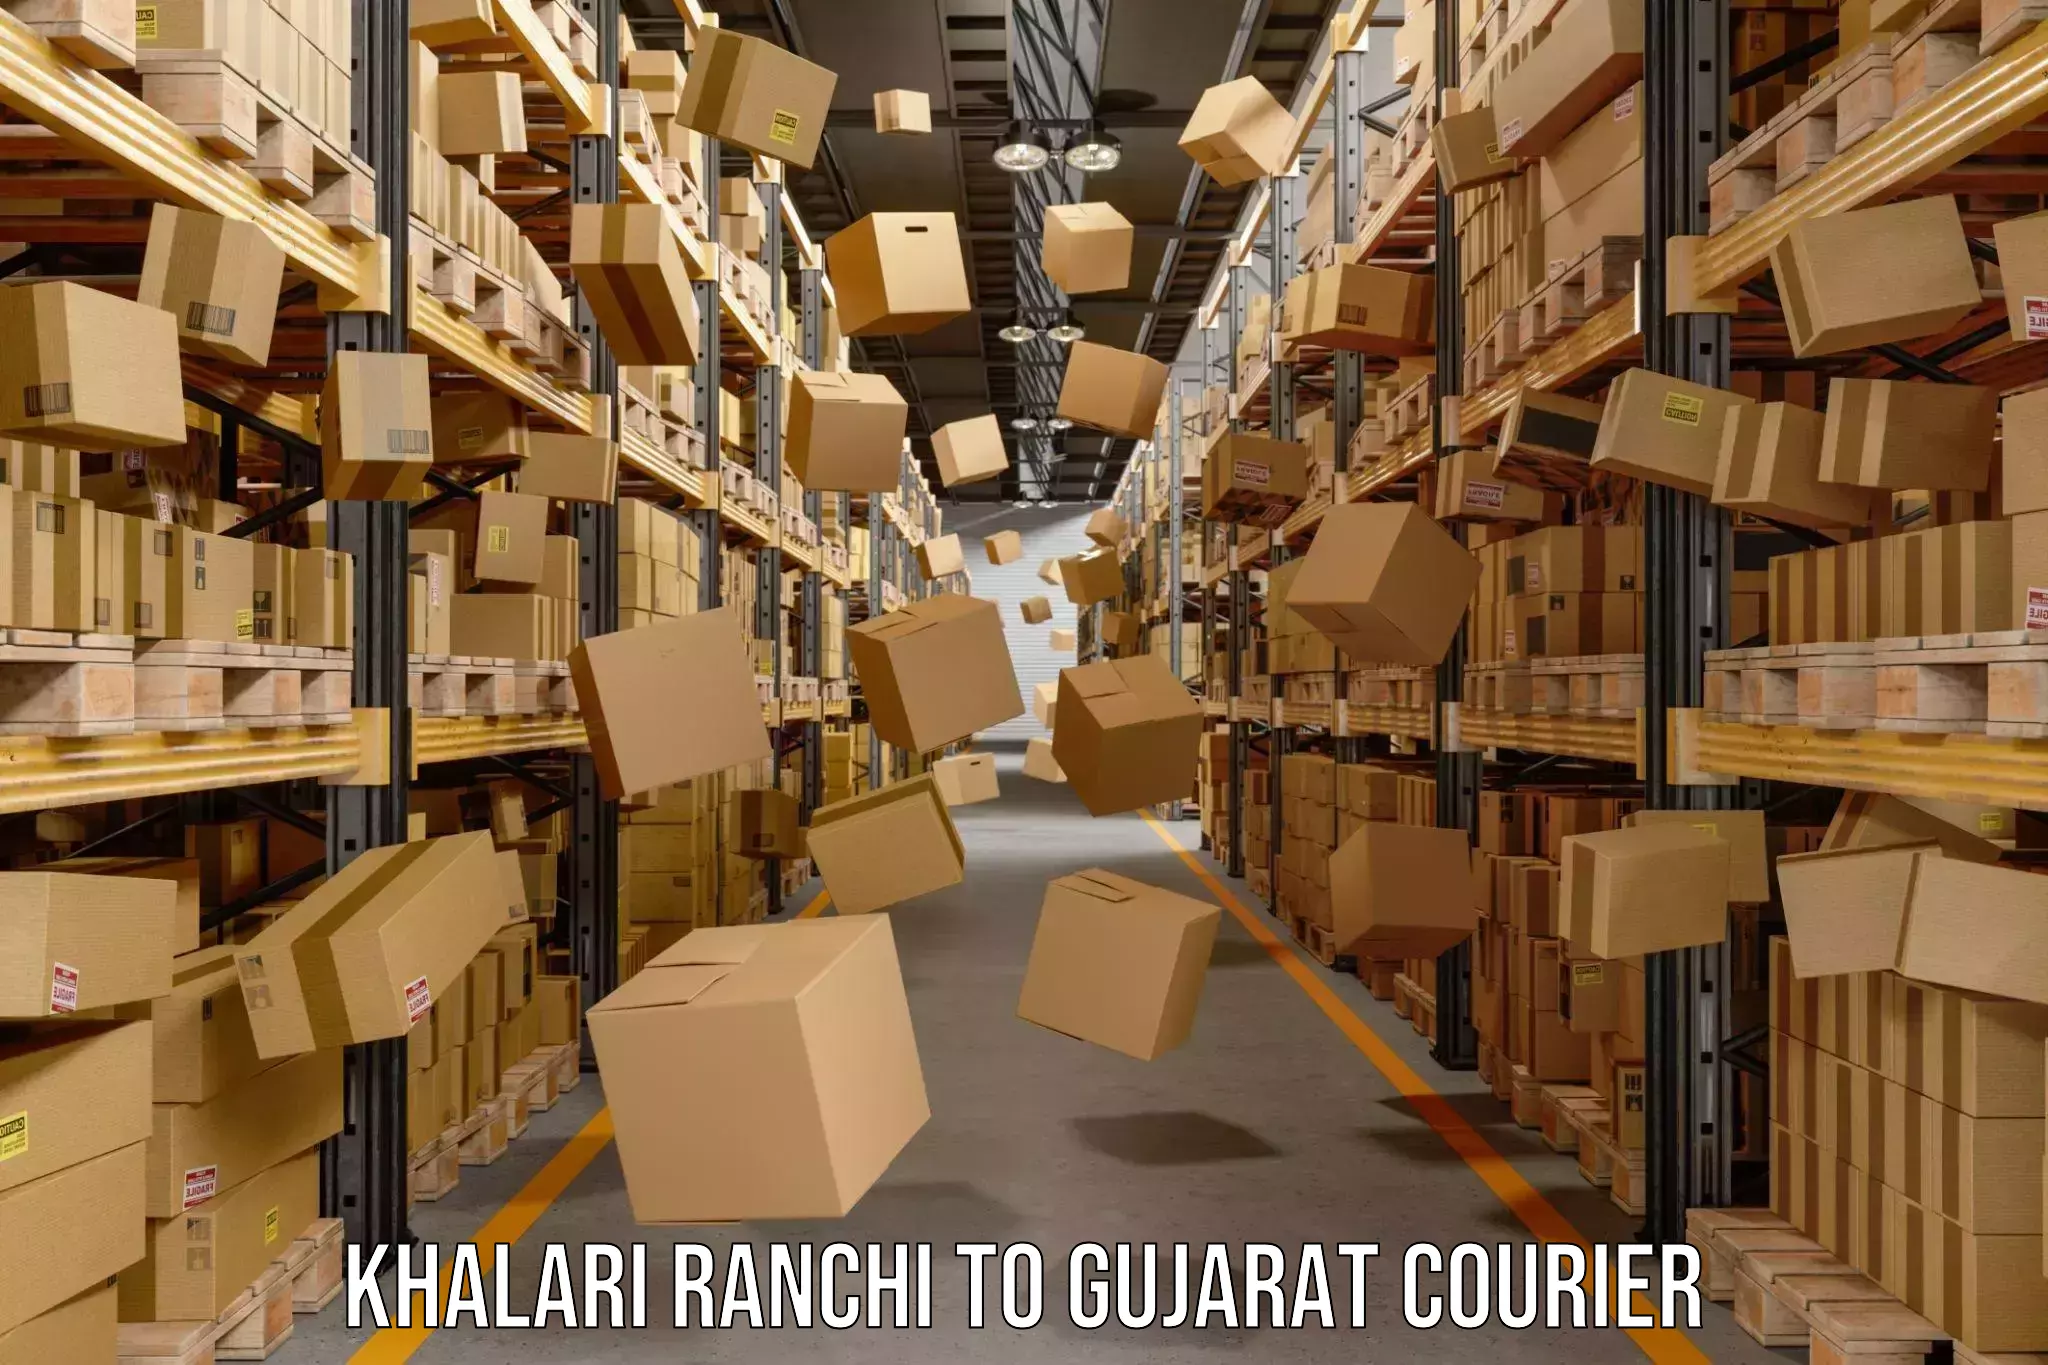 State-of-the-art courier technology Khalari Ranchi to Gujarat